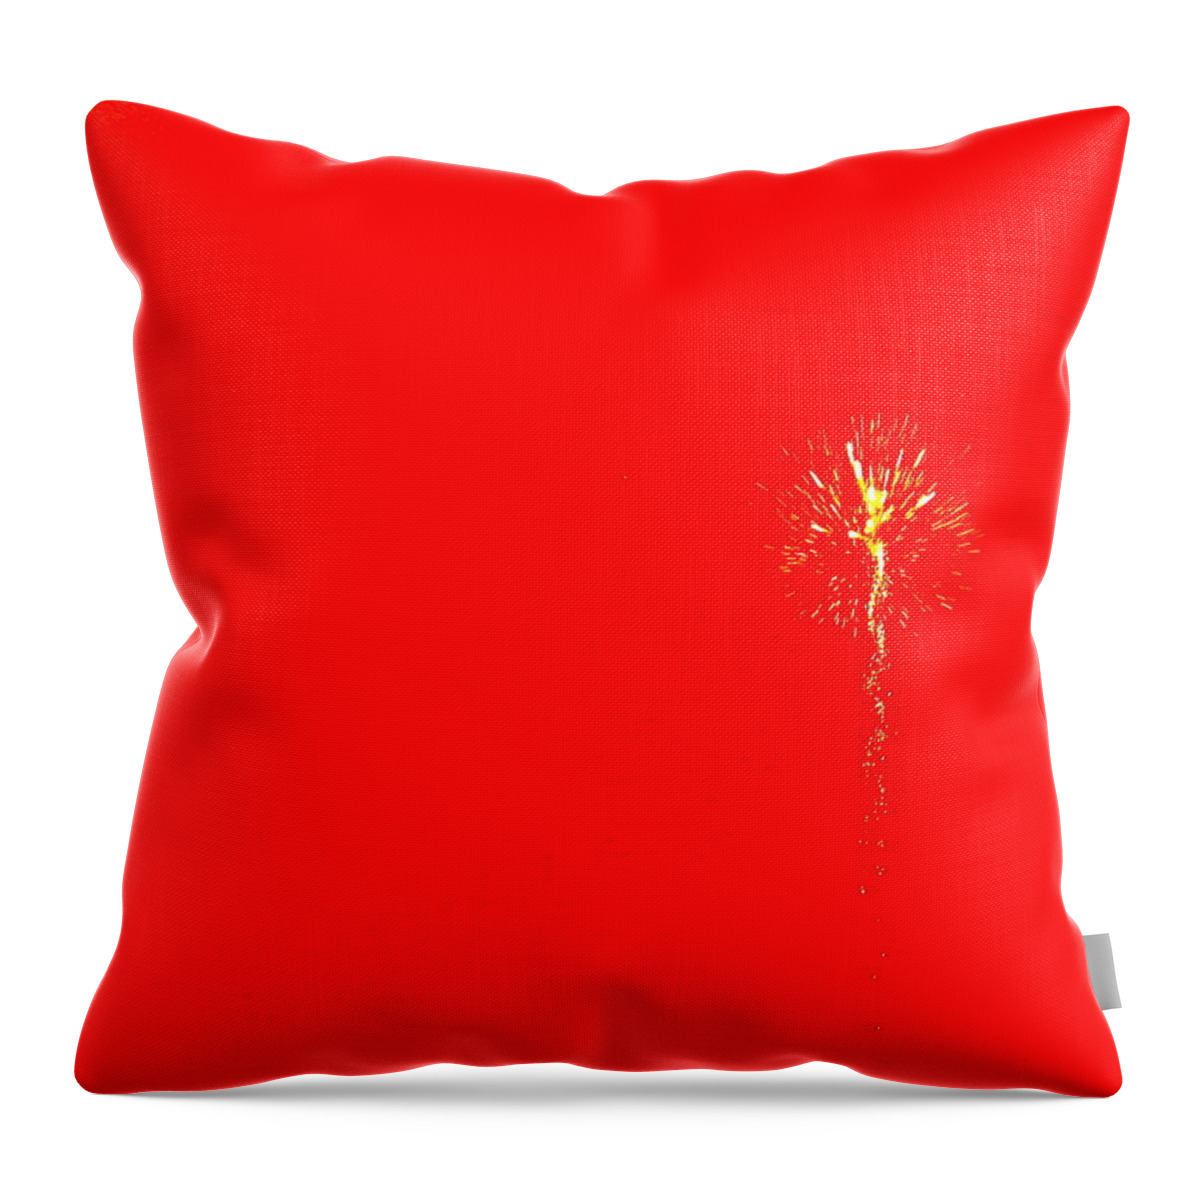 Fireworks July 4th Eloy Arizona 2004 Throw Pillow featuring the photograph Fireworks July 4th Eloy Arizona 2004 by David Lee Guss